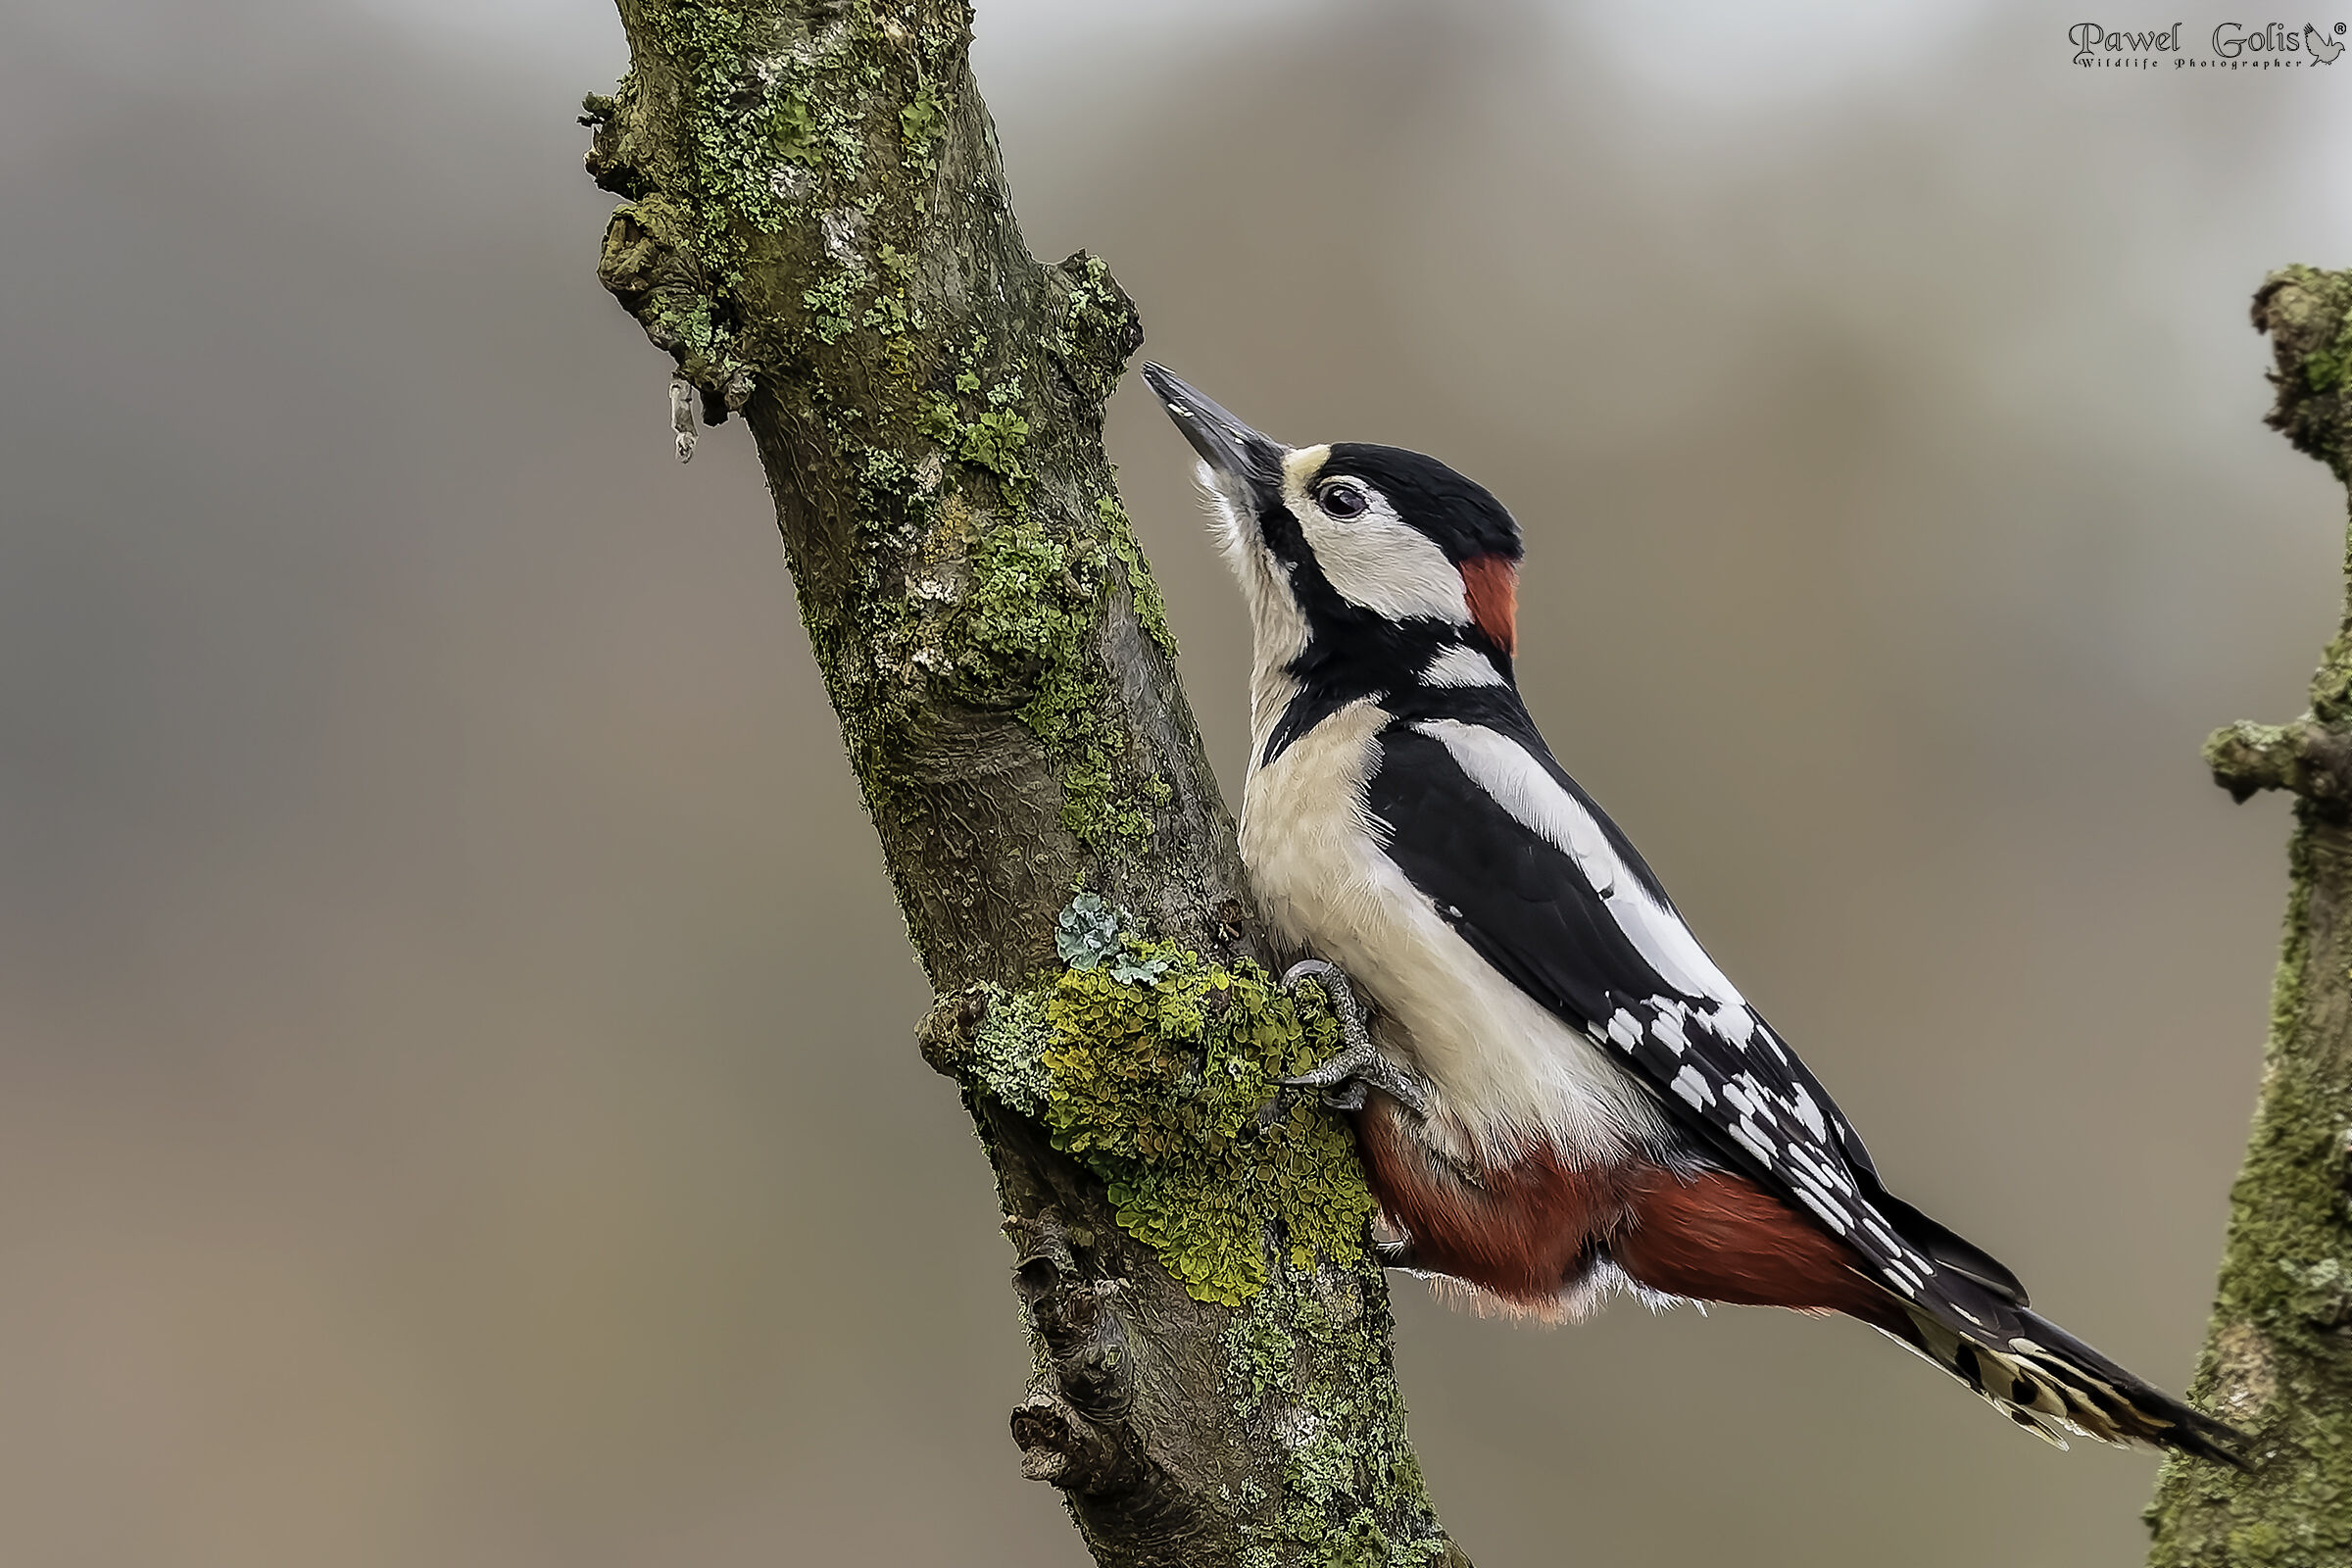 The great spotted woodpecker (Dendrocopos major)...